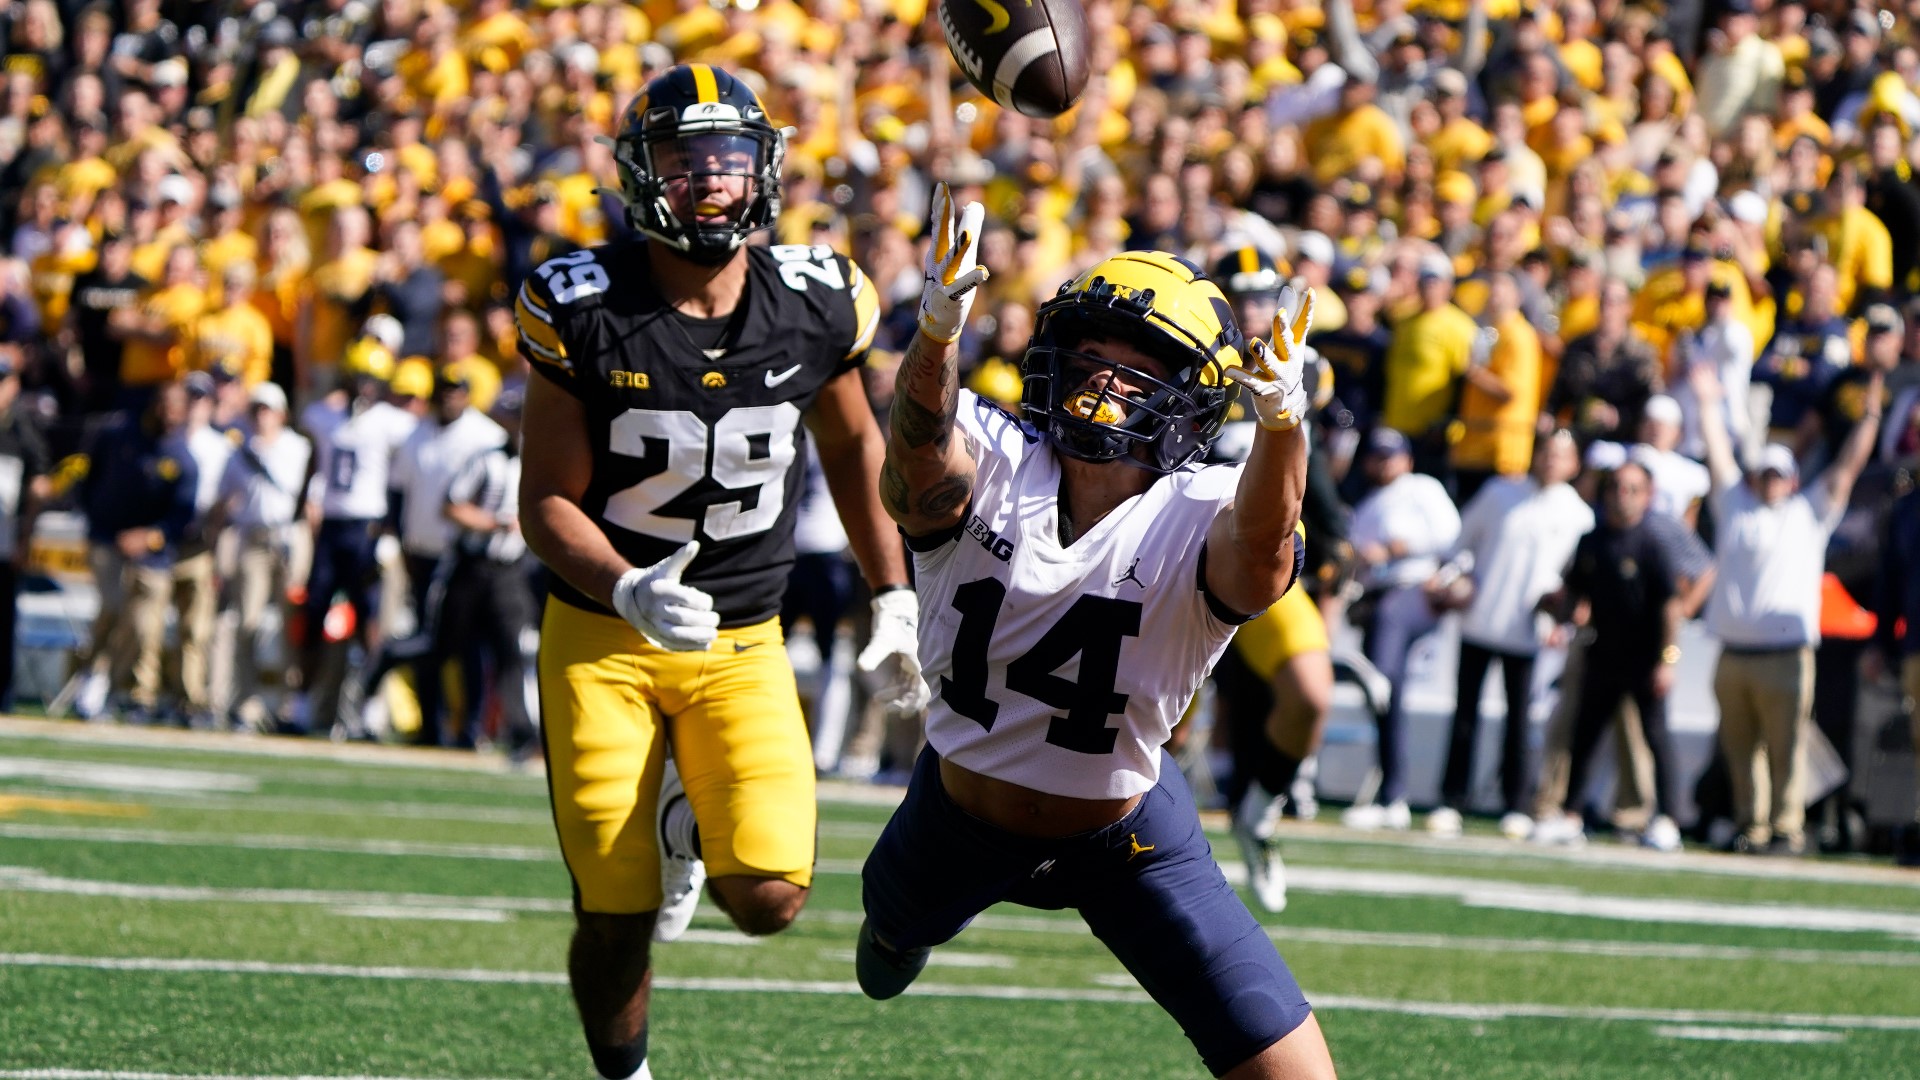 Michigan was ready to play at Iowa’s Kinnick Stadium, right down to the pink towels.